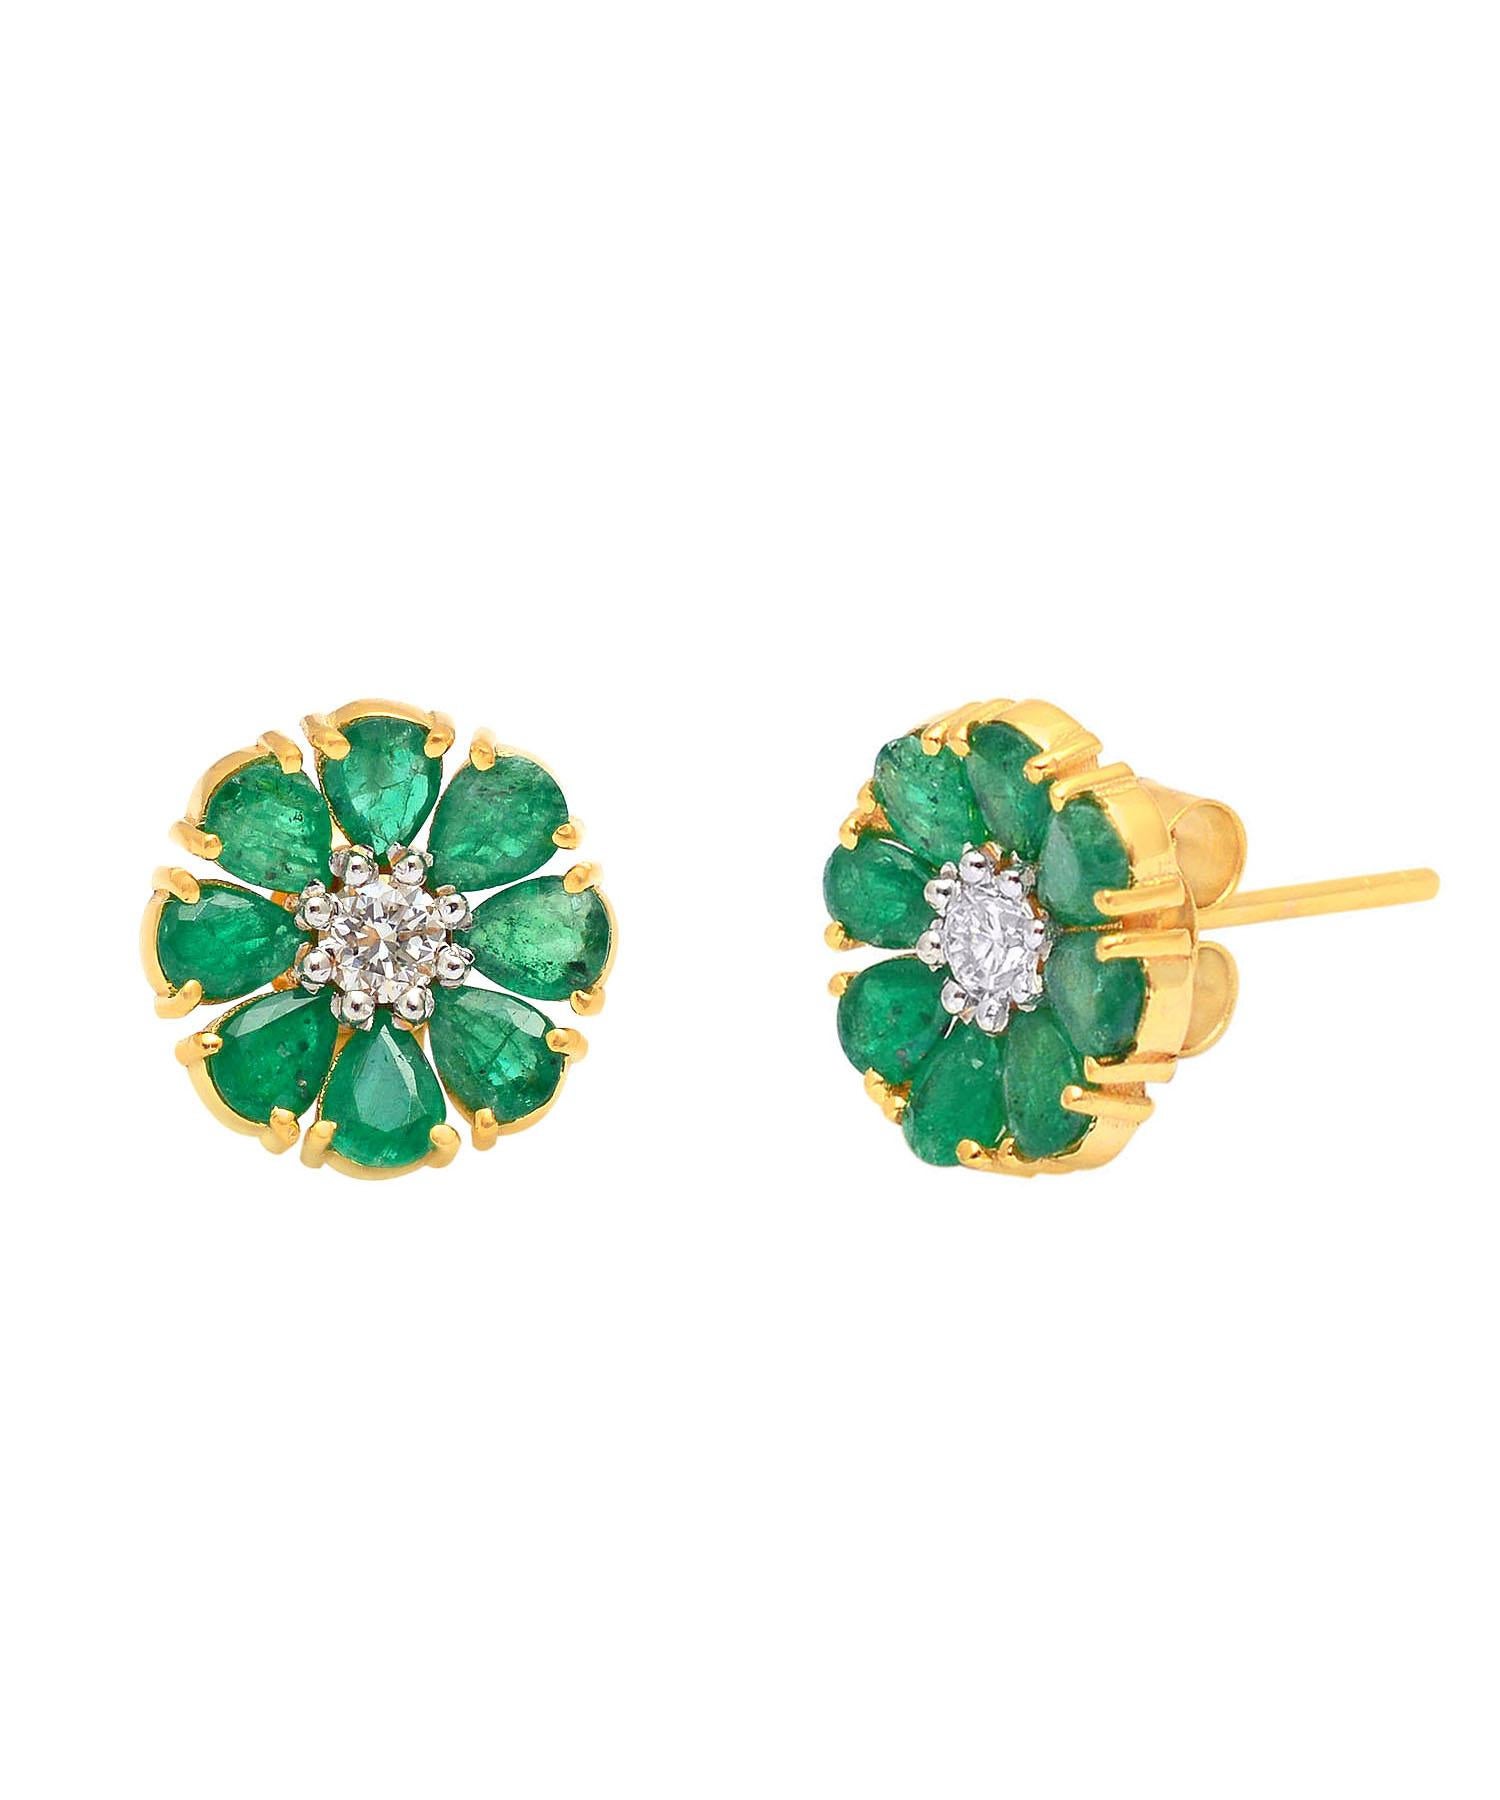 Wear your love for spring with these dainty floral motif stud earrings. Consisting of brilliant cut diamonds, 18K yellow gold, and emerald earrings, this piece can be worn anywhere, anytime, with any outfit. What will your pair yours with?

